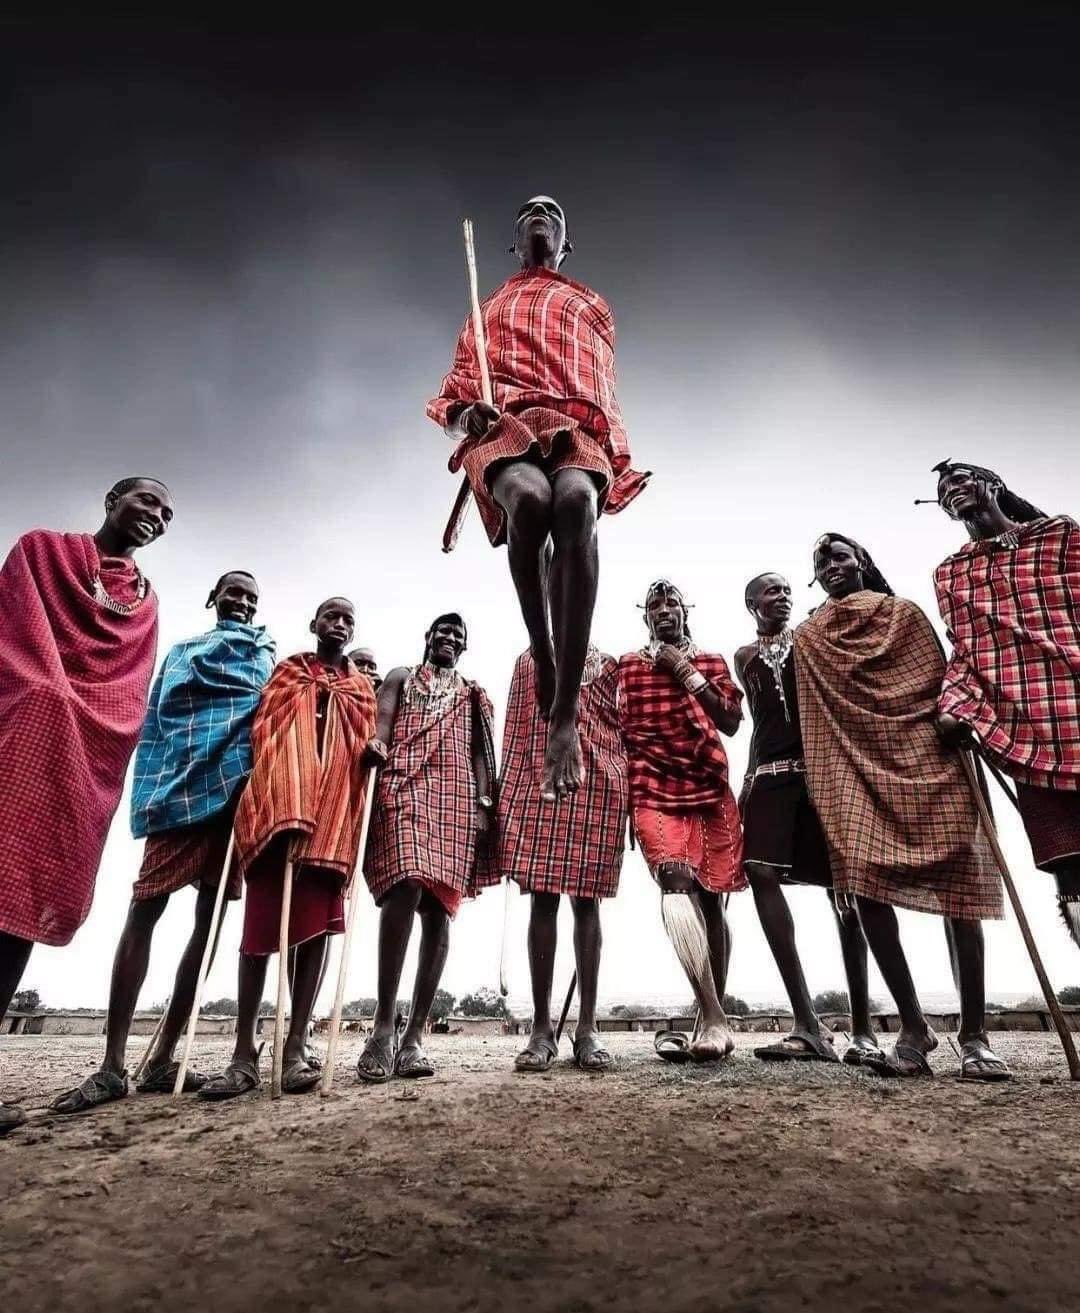 A Maasai holding a stick leaps high in the air in front of a group of other menn